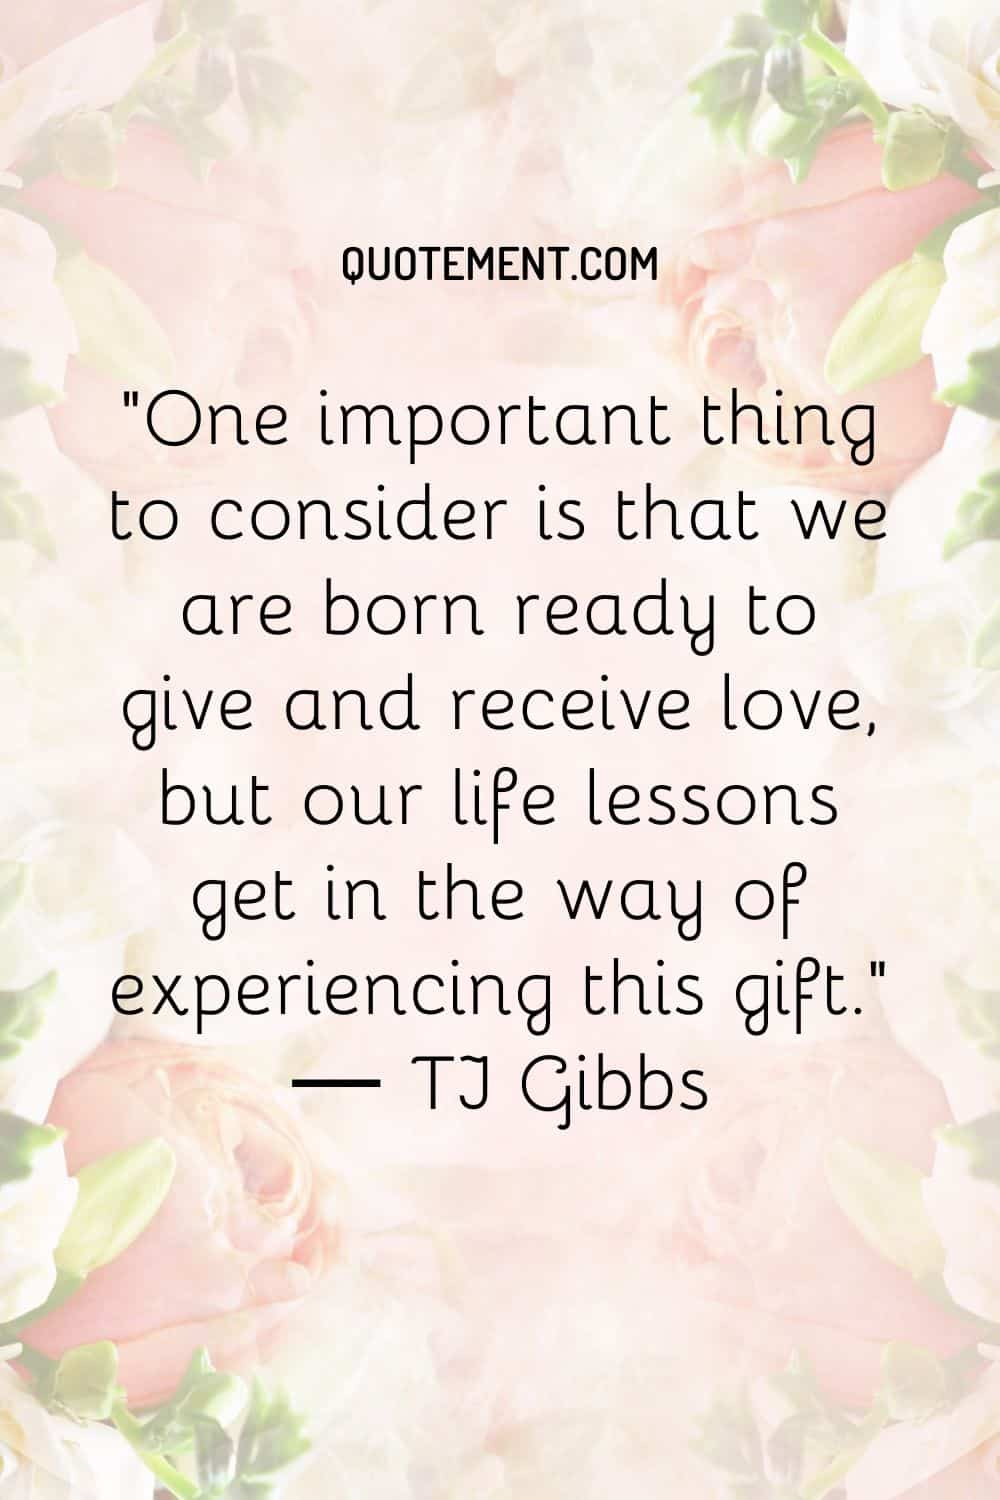 One important thing to consider is that we are born ready to give and receive love, but our life lessons get in the way of experiencing this gift